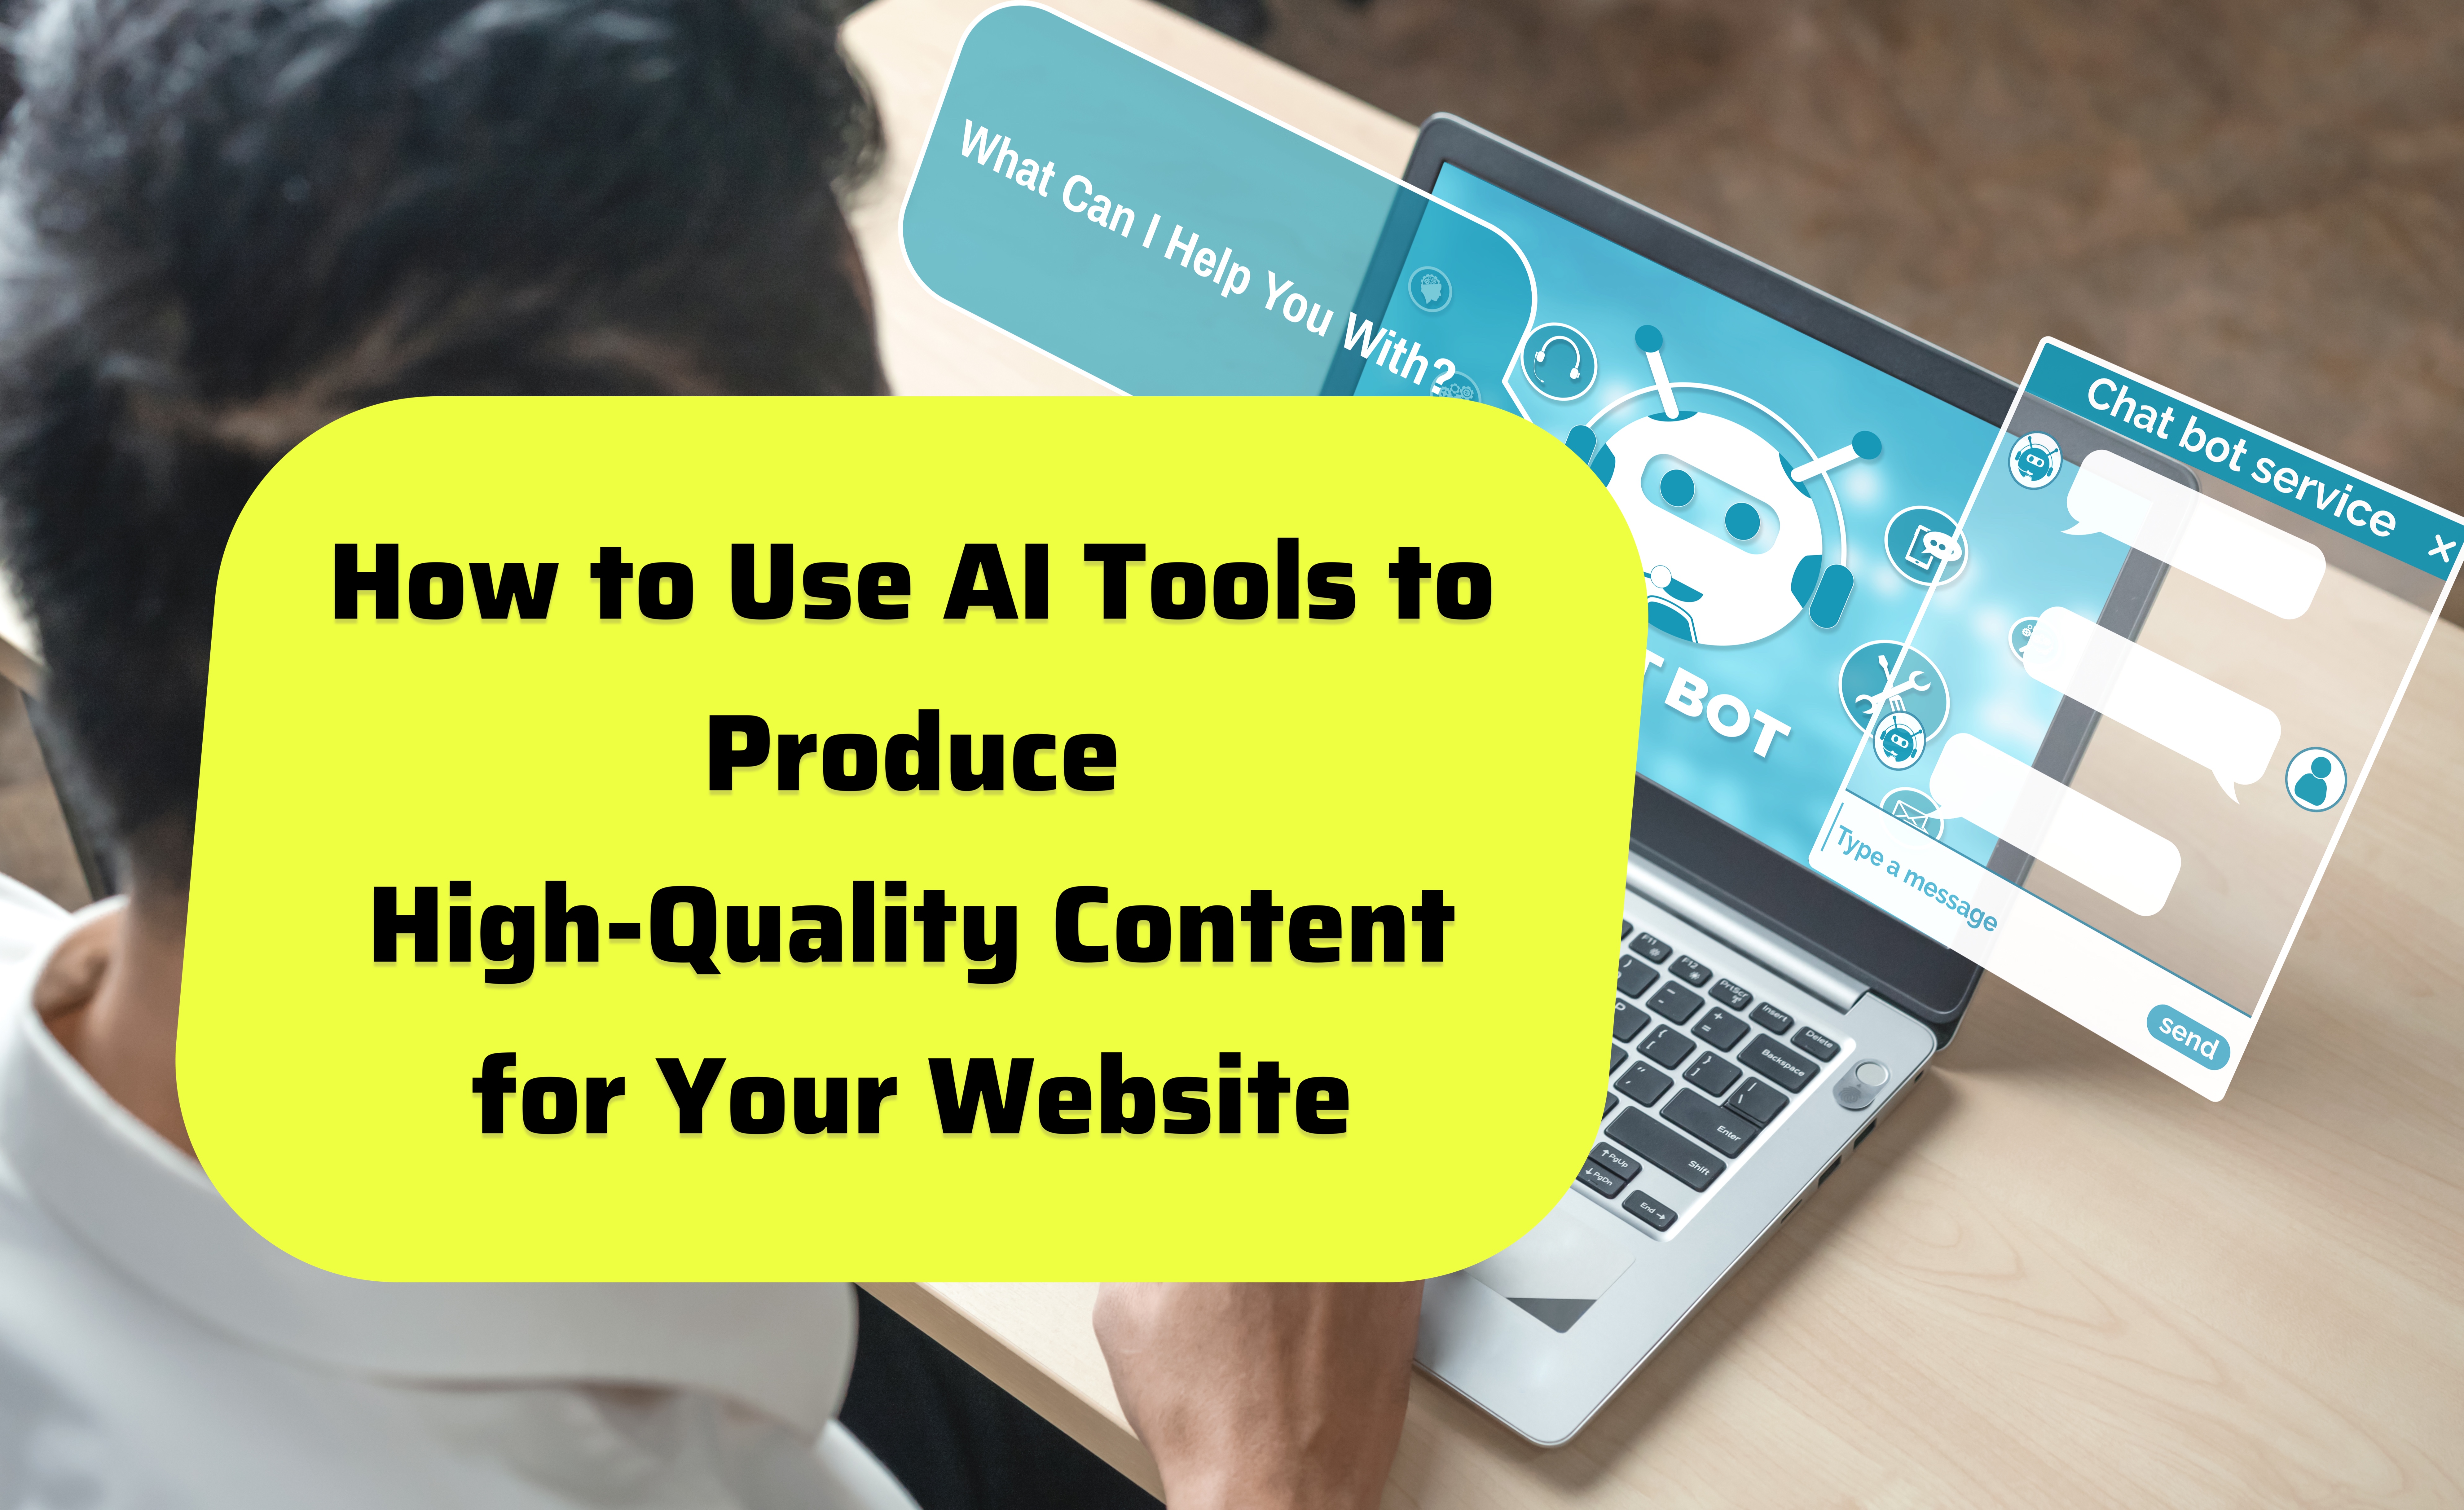 How to Use AI Tools to Produce High-Quality Content for Your Website